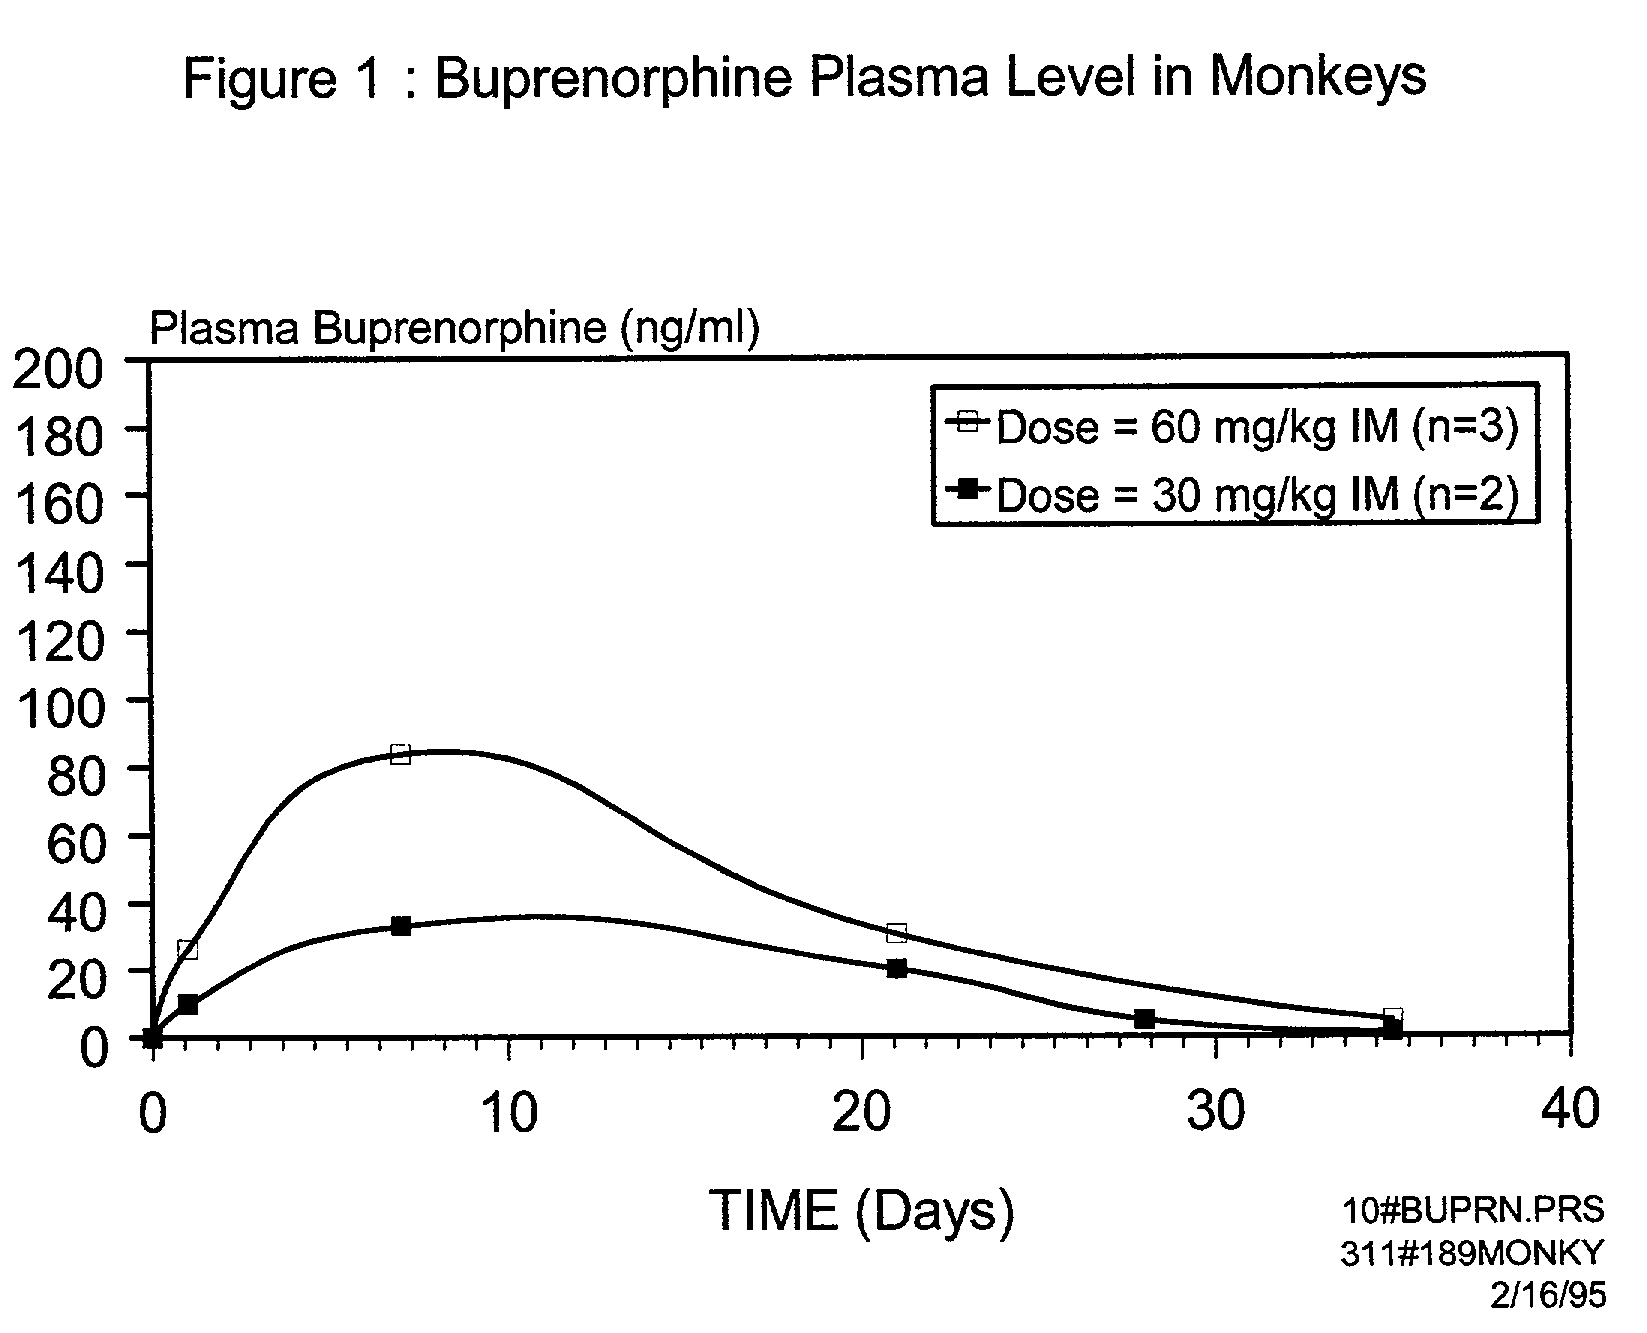 High drug loaded injectable microparticle compositions and methods of treating opioid drug dependence